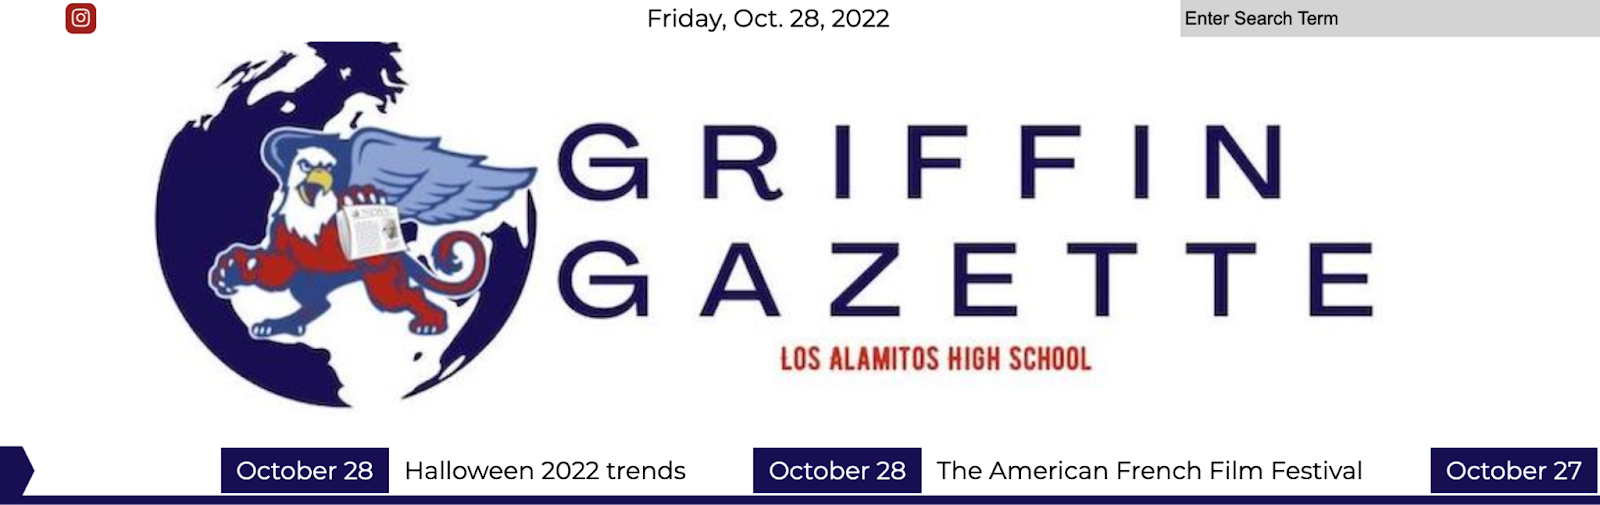 After a hiatus due to the Covid-19 pandemic, student journalism is back at Los Alamitos High School. The school newspaper was rebranded this year as the Griffin Gazette. Screenshot from lahsgriffingazette.com